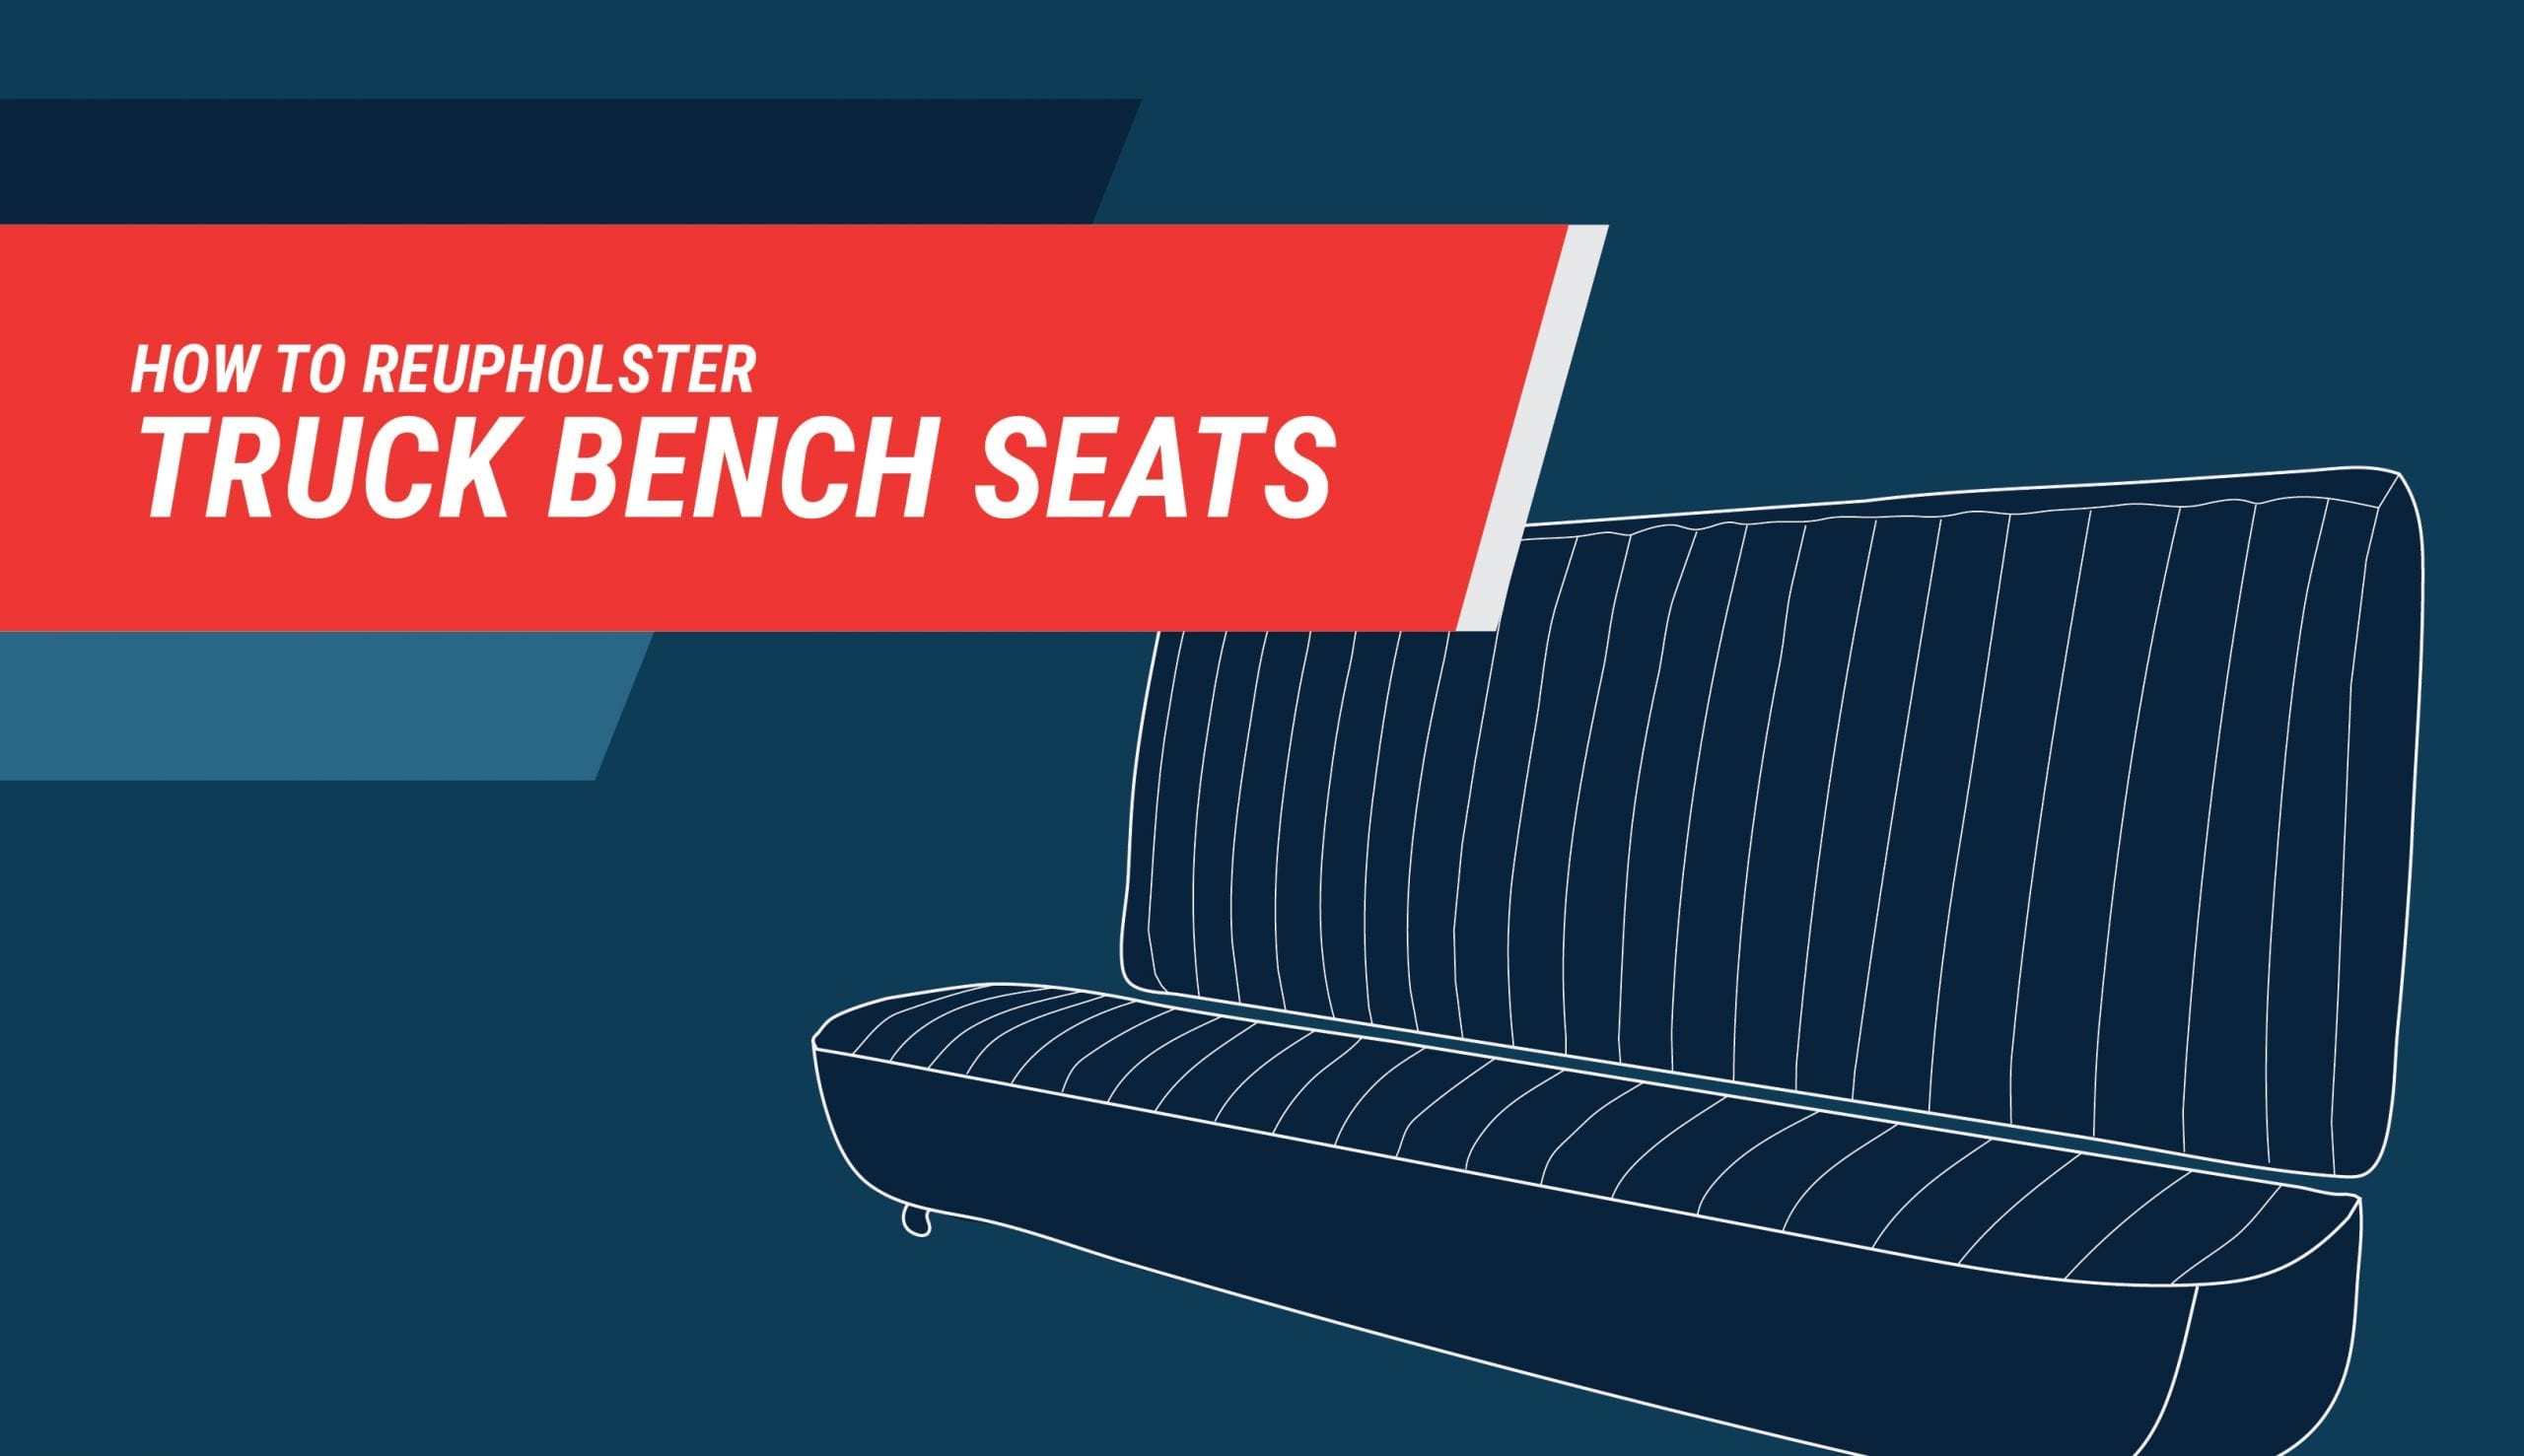 How to Reupholster Truck Bench Seats